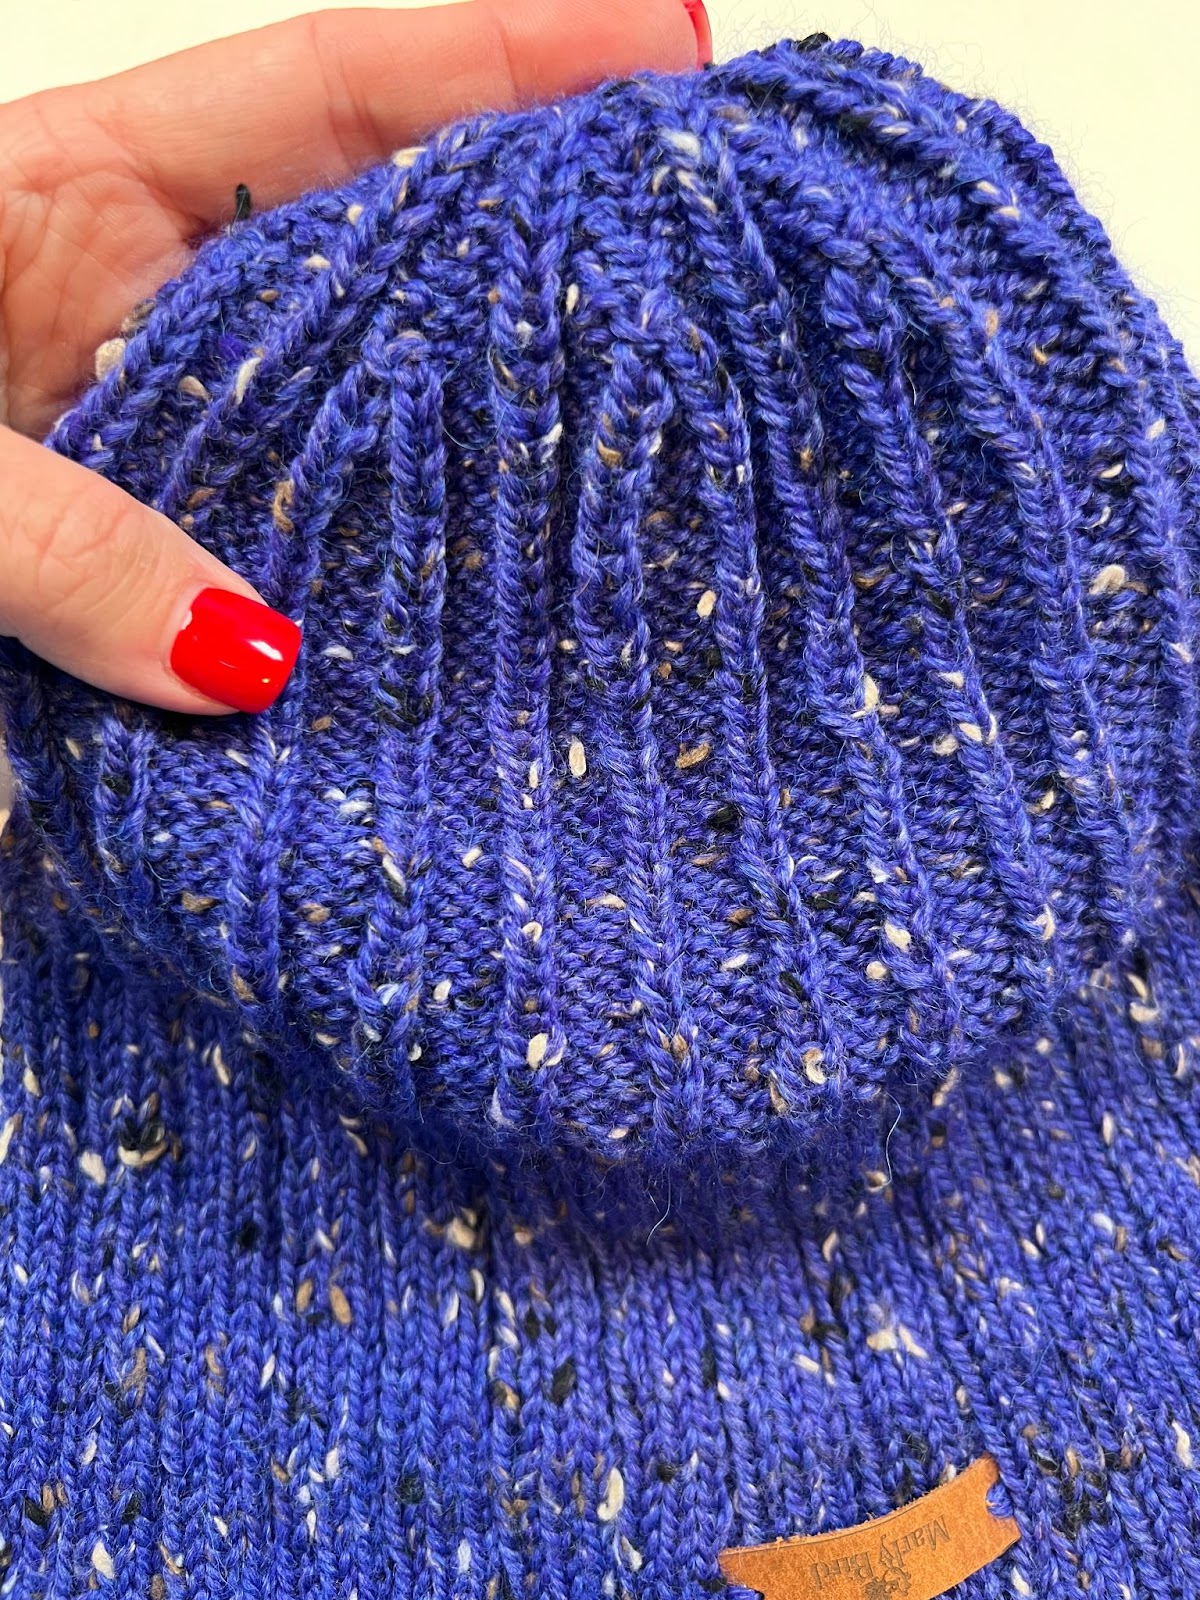 Close up of the Every Day Knit Hat inside out to see the crown shaping. The center double decreases use allow for distinct columns of knits to form on the inside of the hat - Marly Bird